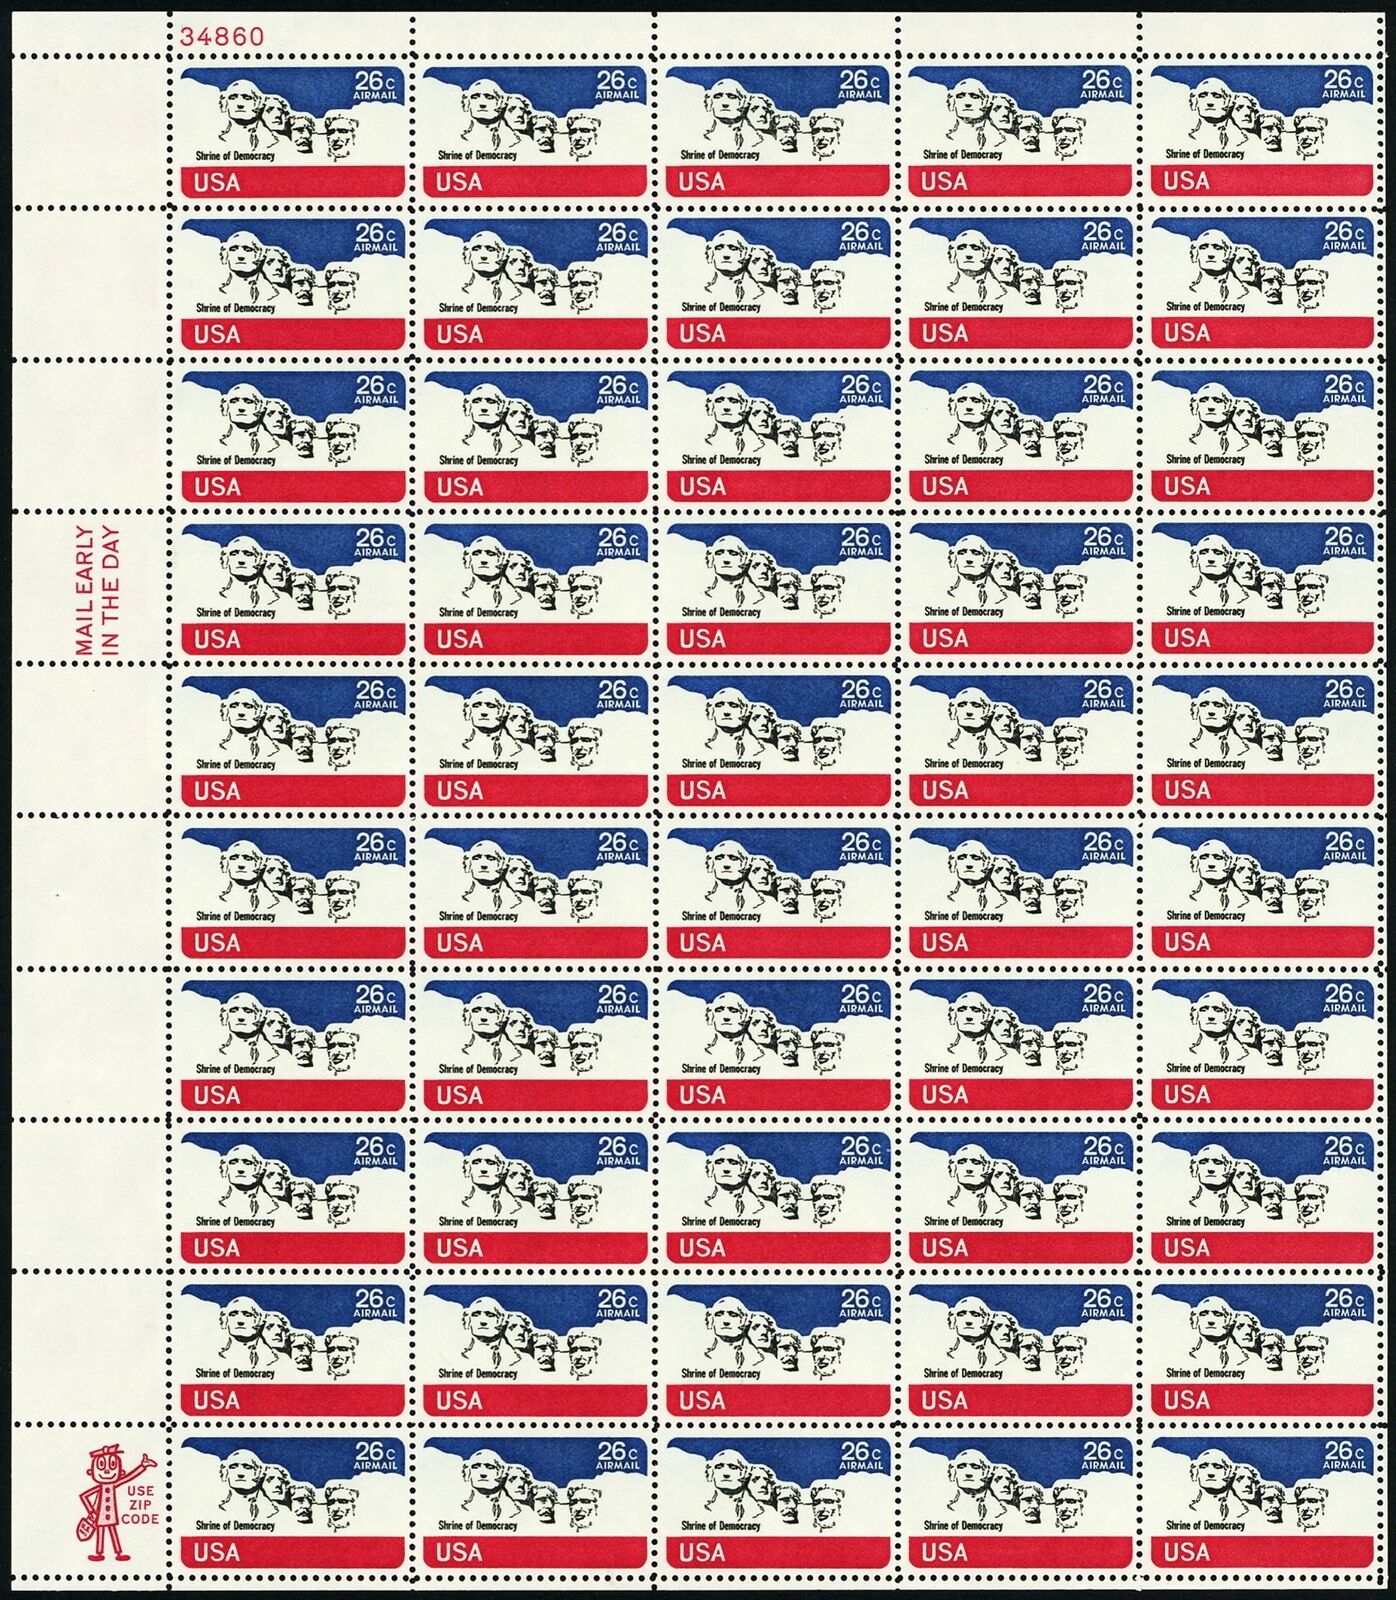 Mount Rushmore Full Sheet Of Fifty 26 Cent Postage Stamps Scott C88